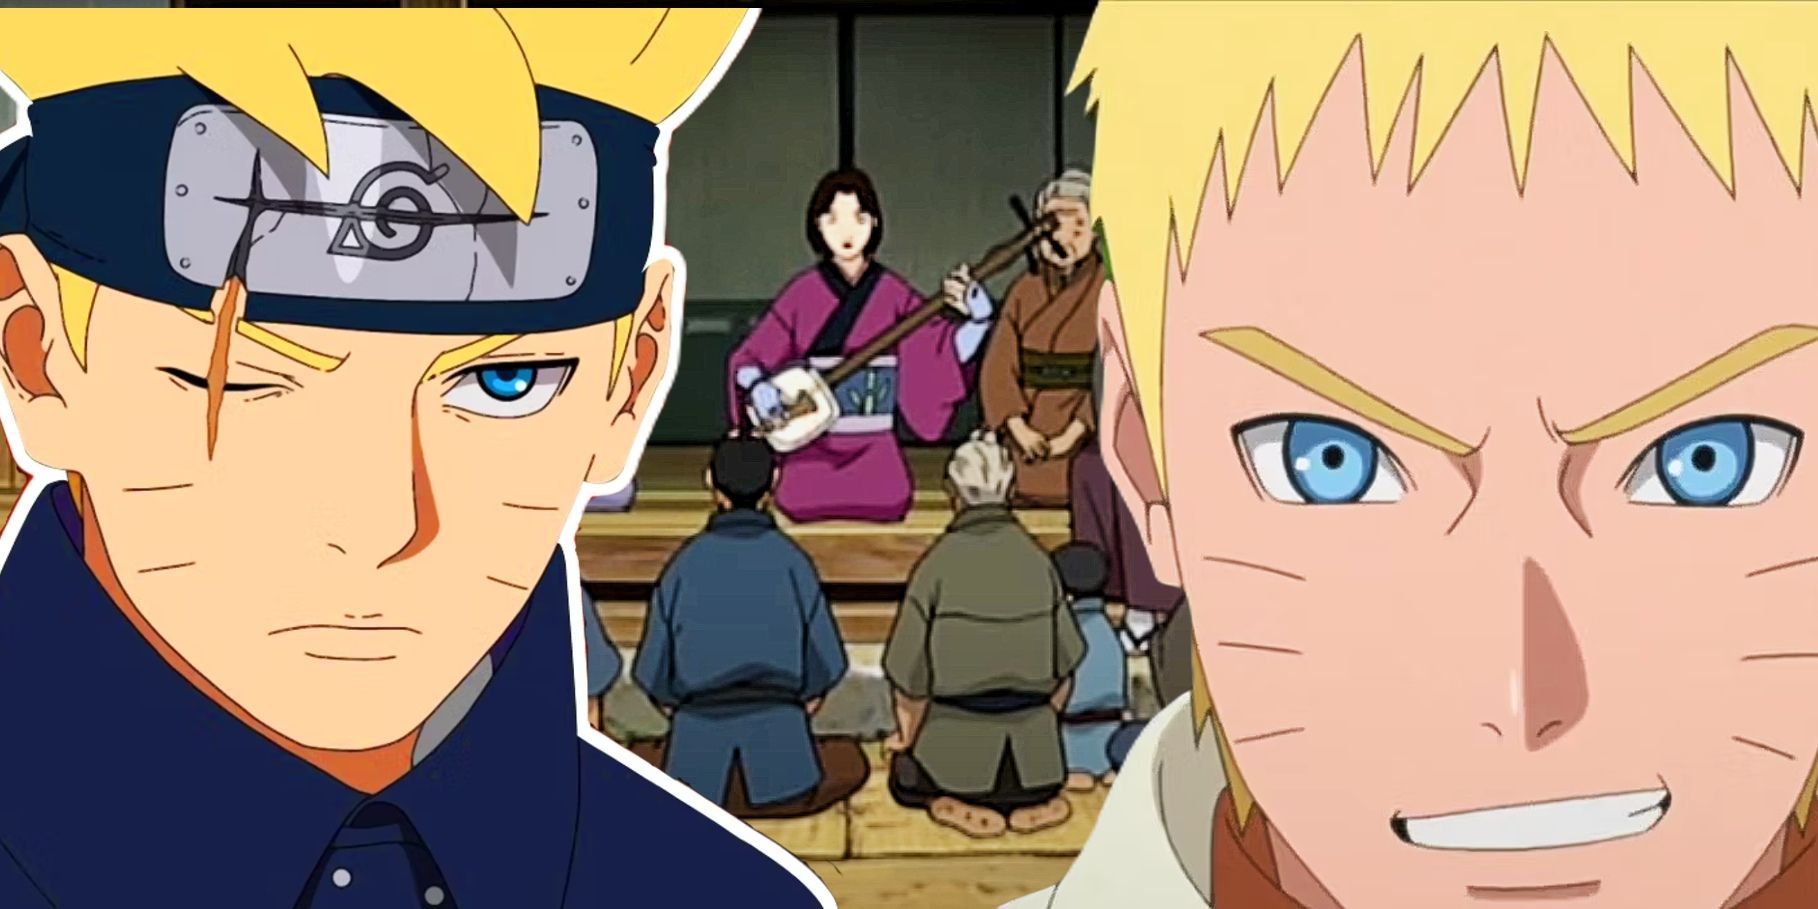 Naruto & Boruto's Cast Get a Classic Japanese Redesign in Gorgeous New Official Art